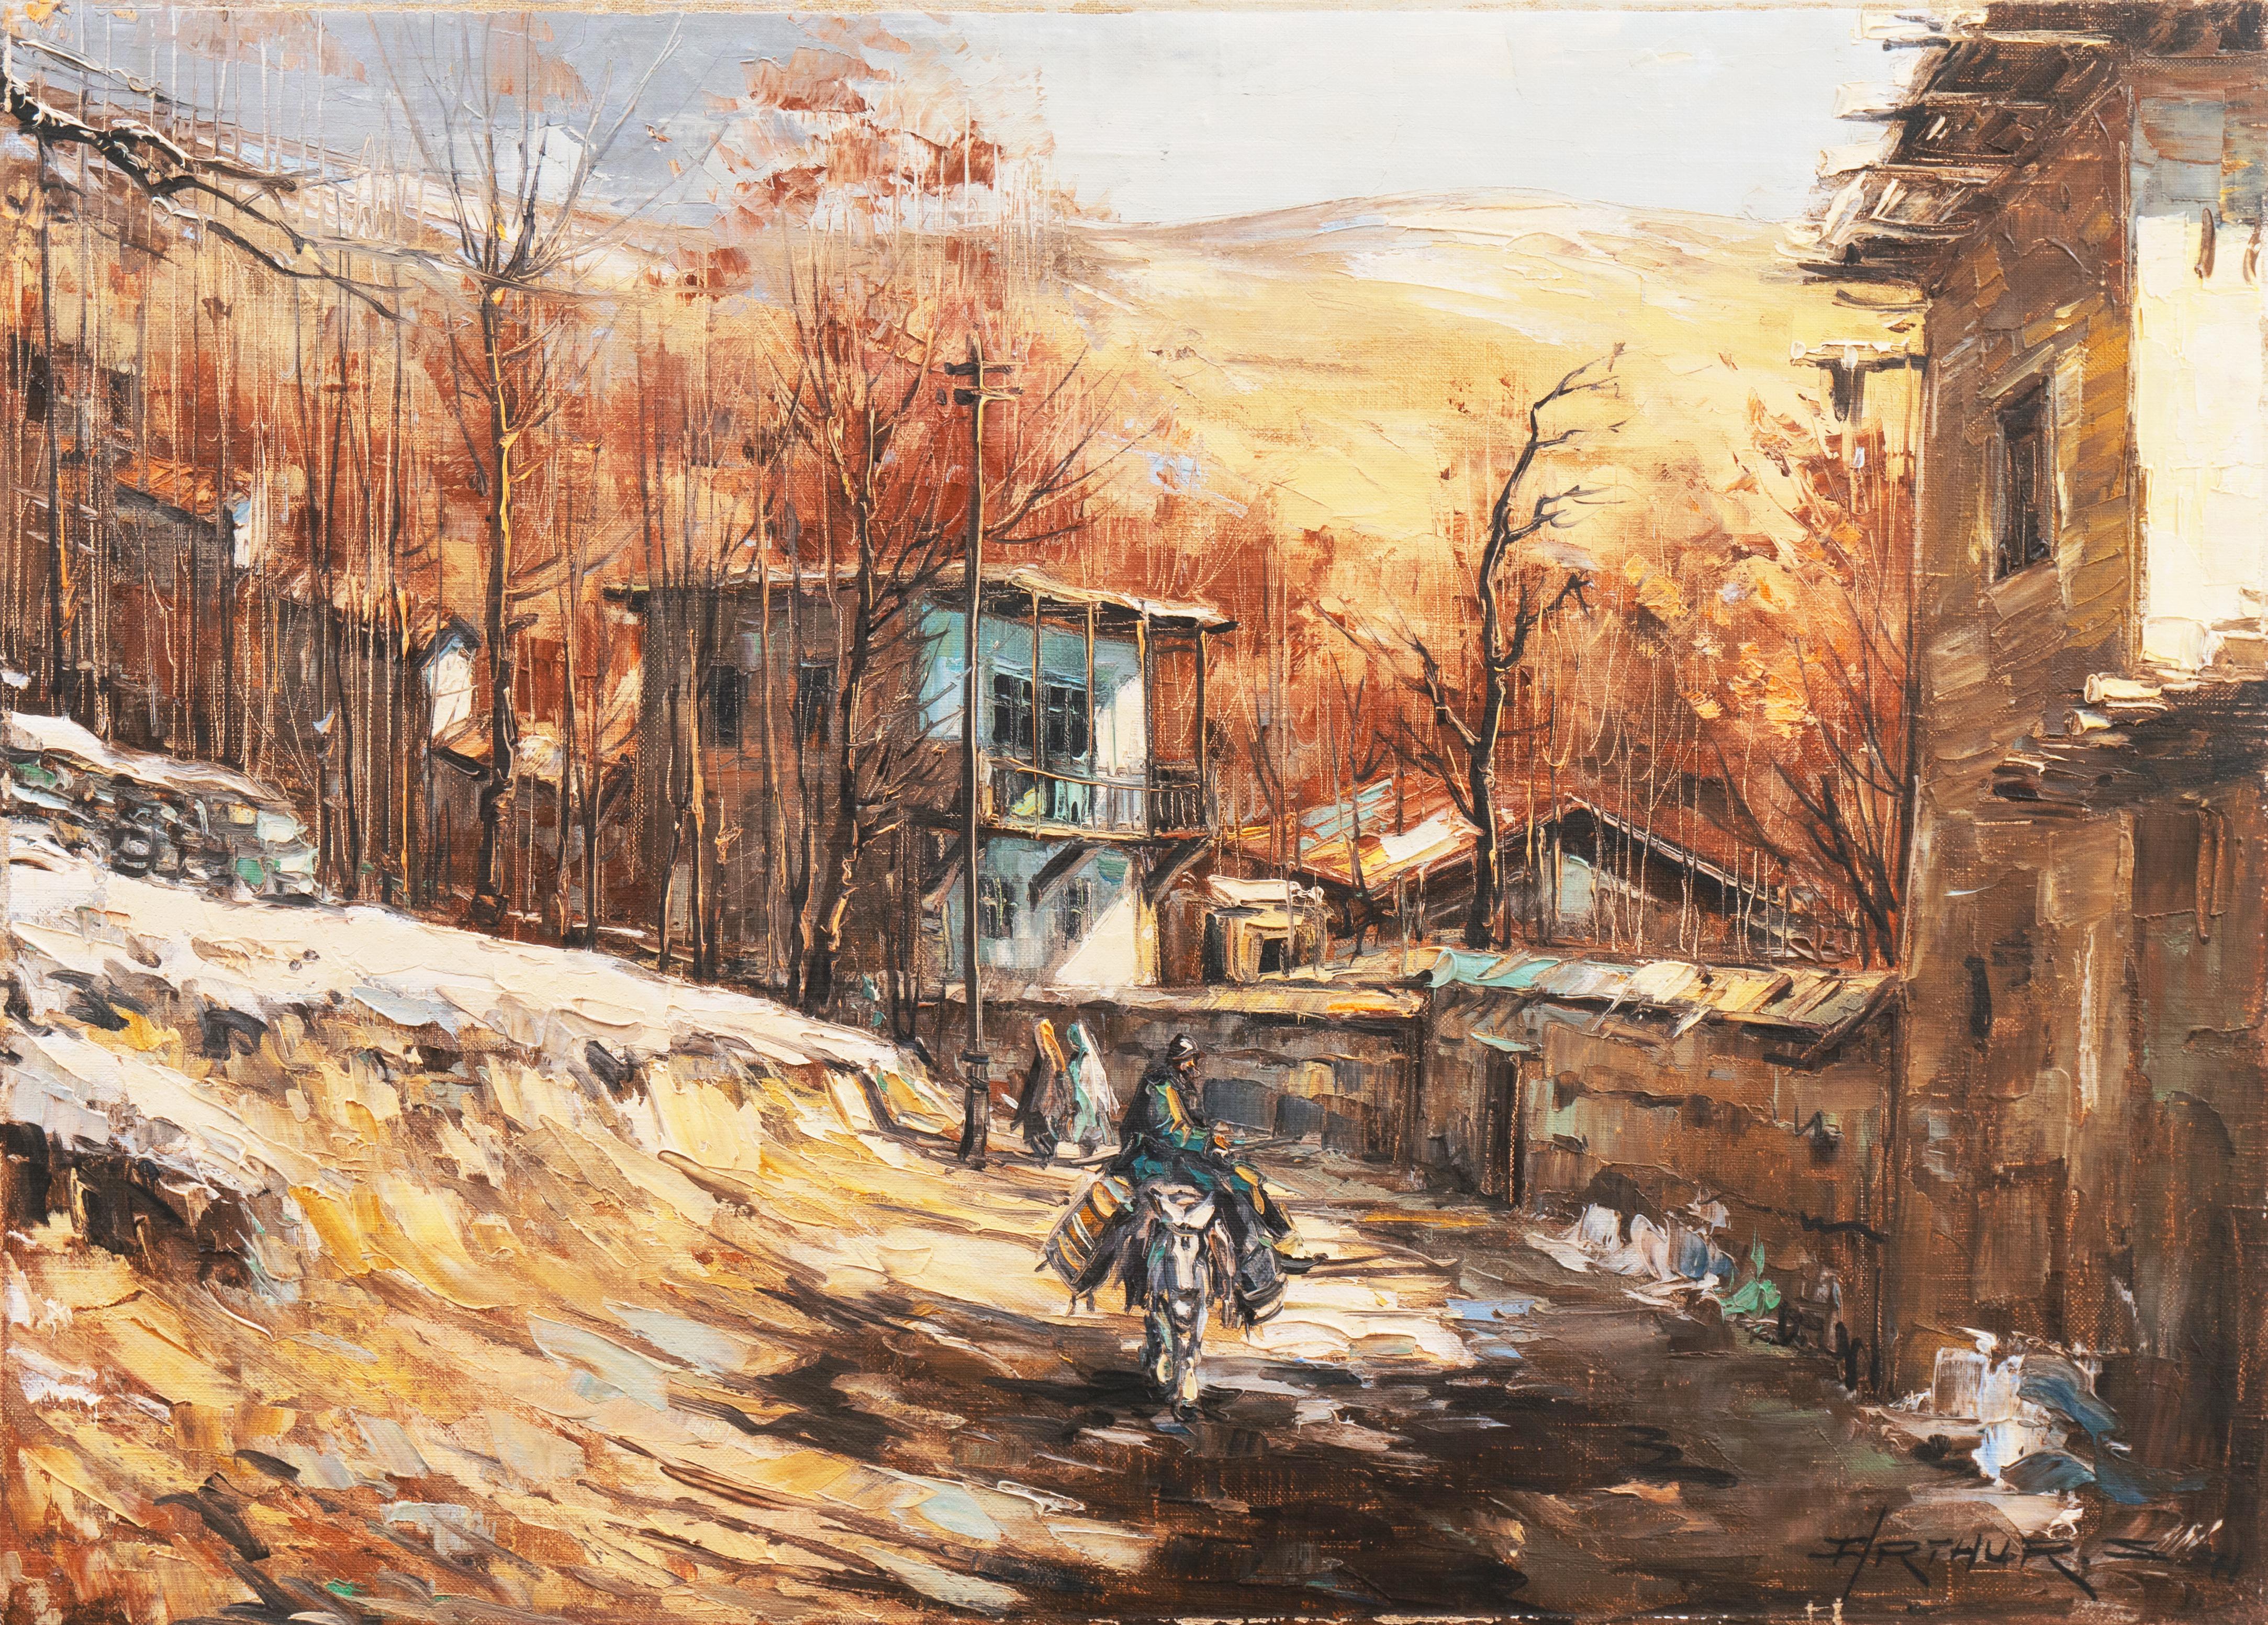 Signed lower right, 'Arthur S.' and dated 1971; additionally inscribed verso, 'Arthur Sarkissian' and titled 'Tehran'.

A panoramic urban landscape showing a winter view of a suburb of the Iranian capital with a man riding a donkey down a snowy